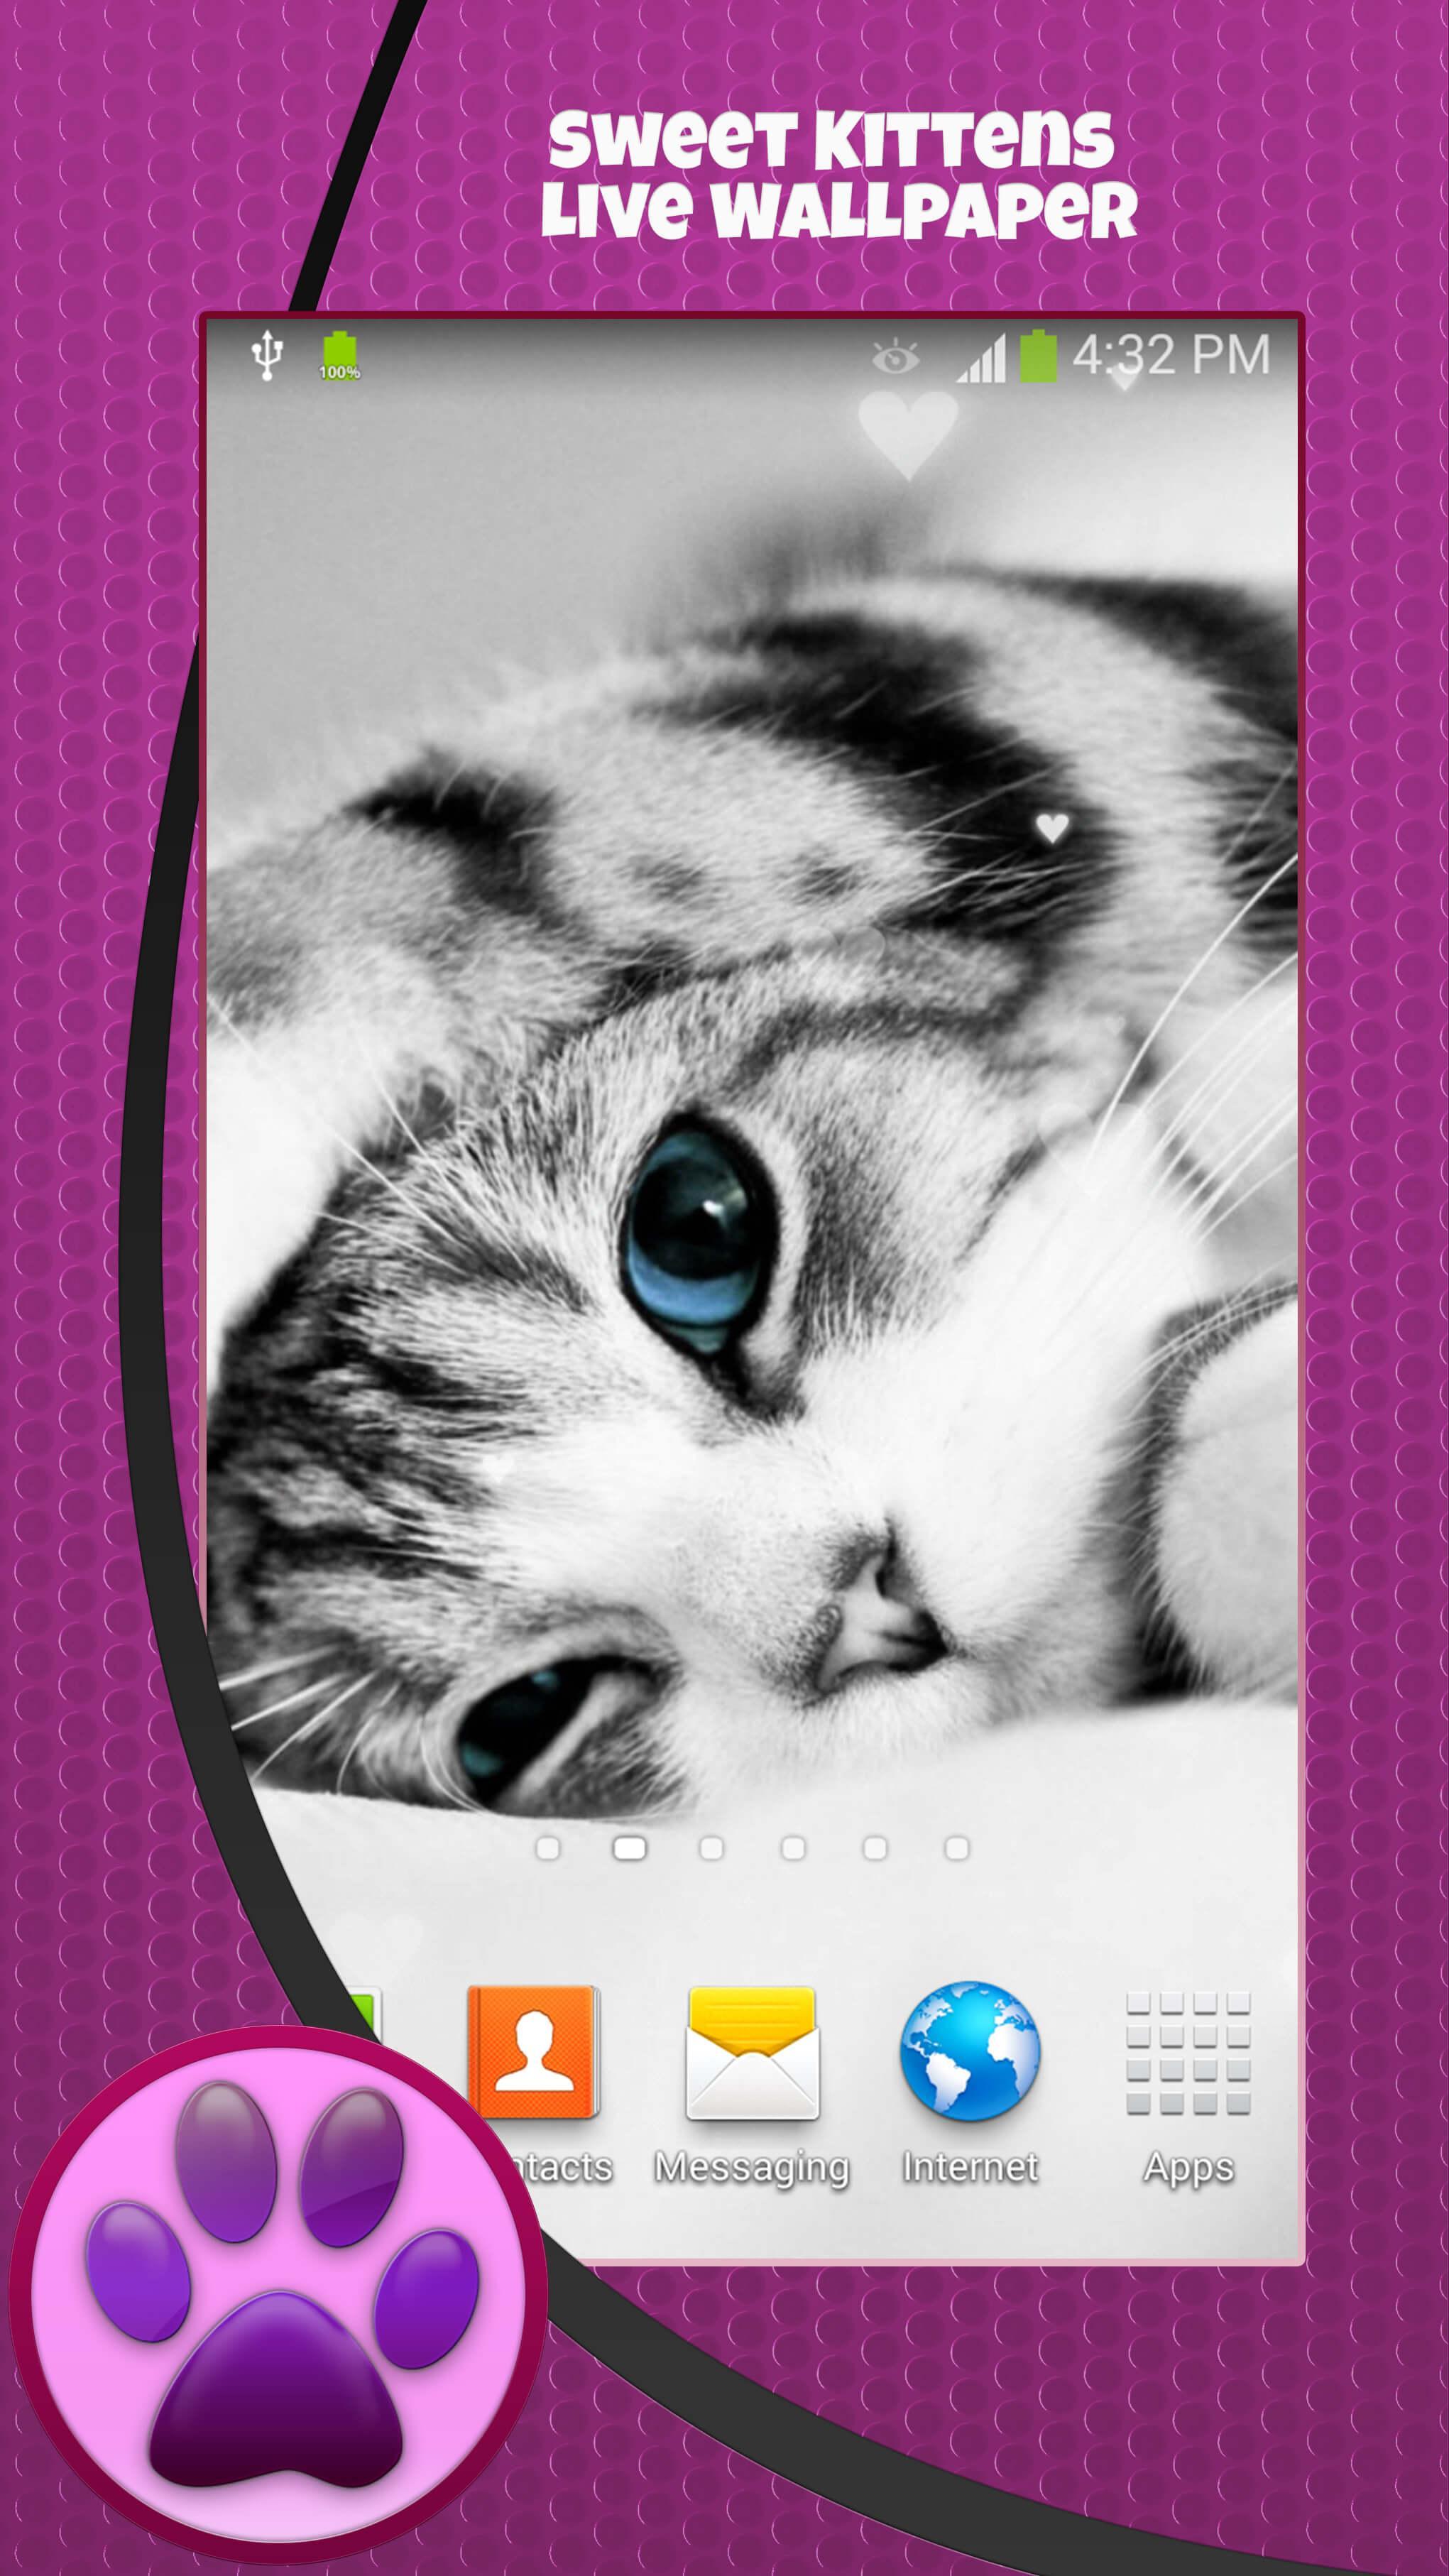 Bayi Kucing Lucu Wallpaper For Android APK Download